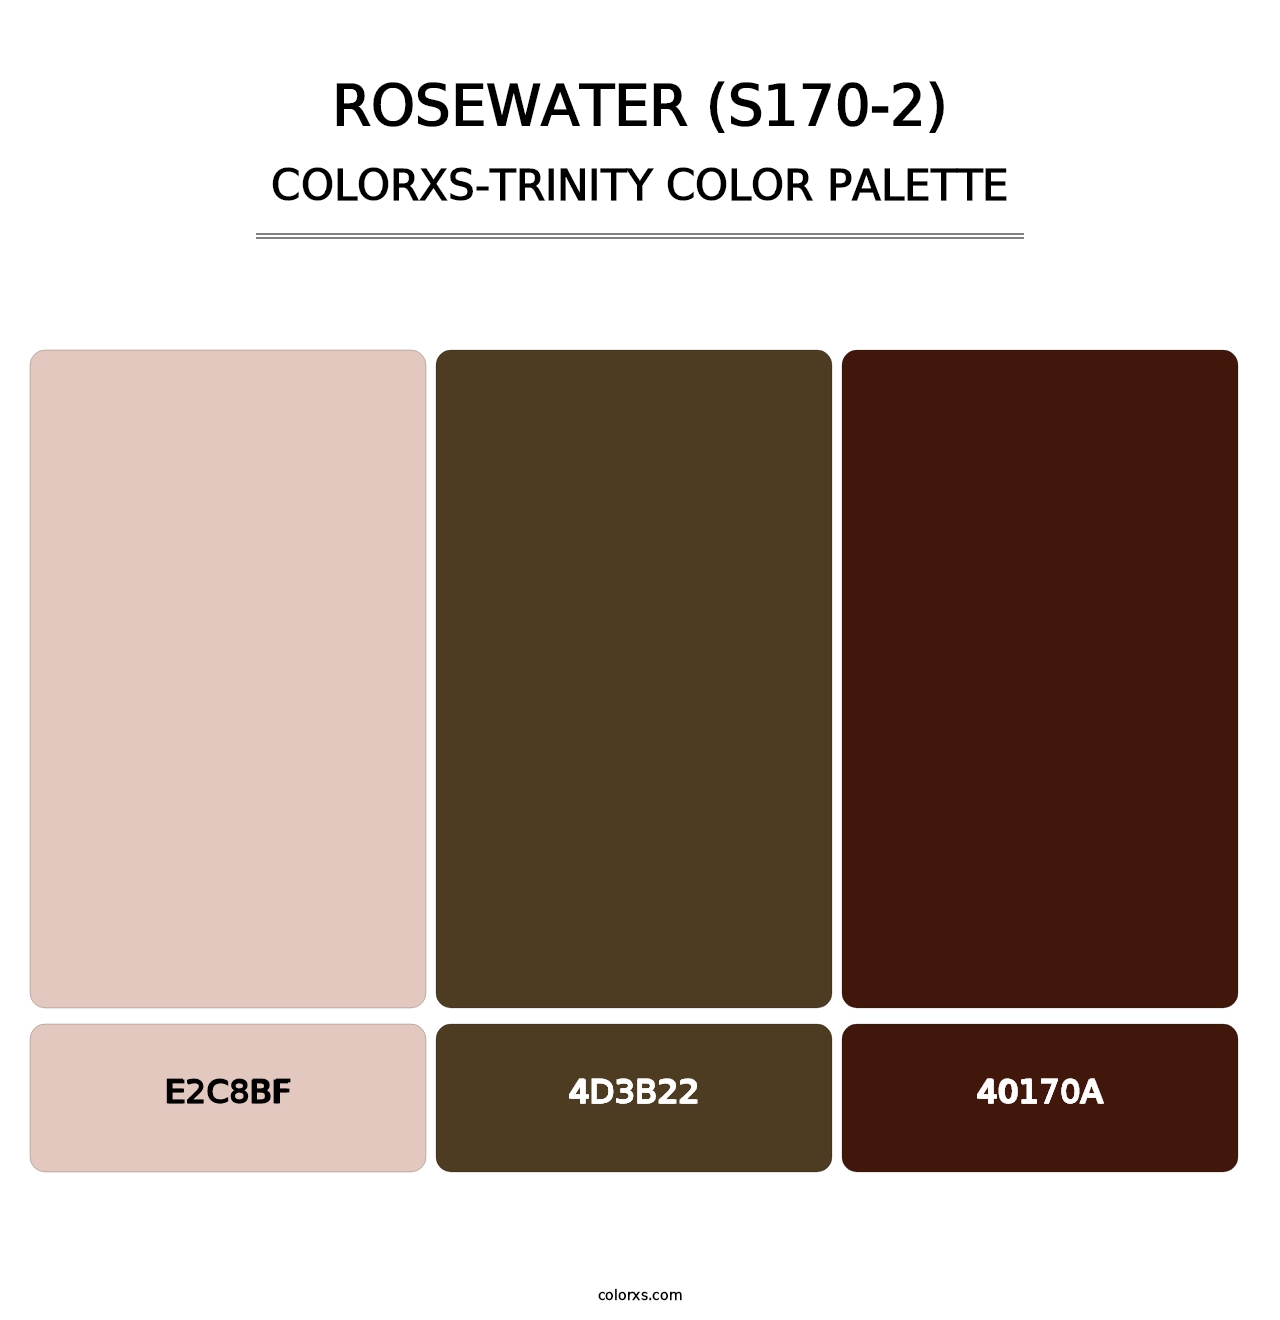 Rosewater (S170-2) - Colorxs Trinity Palette